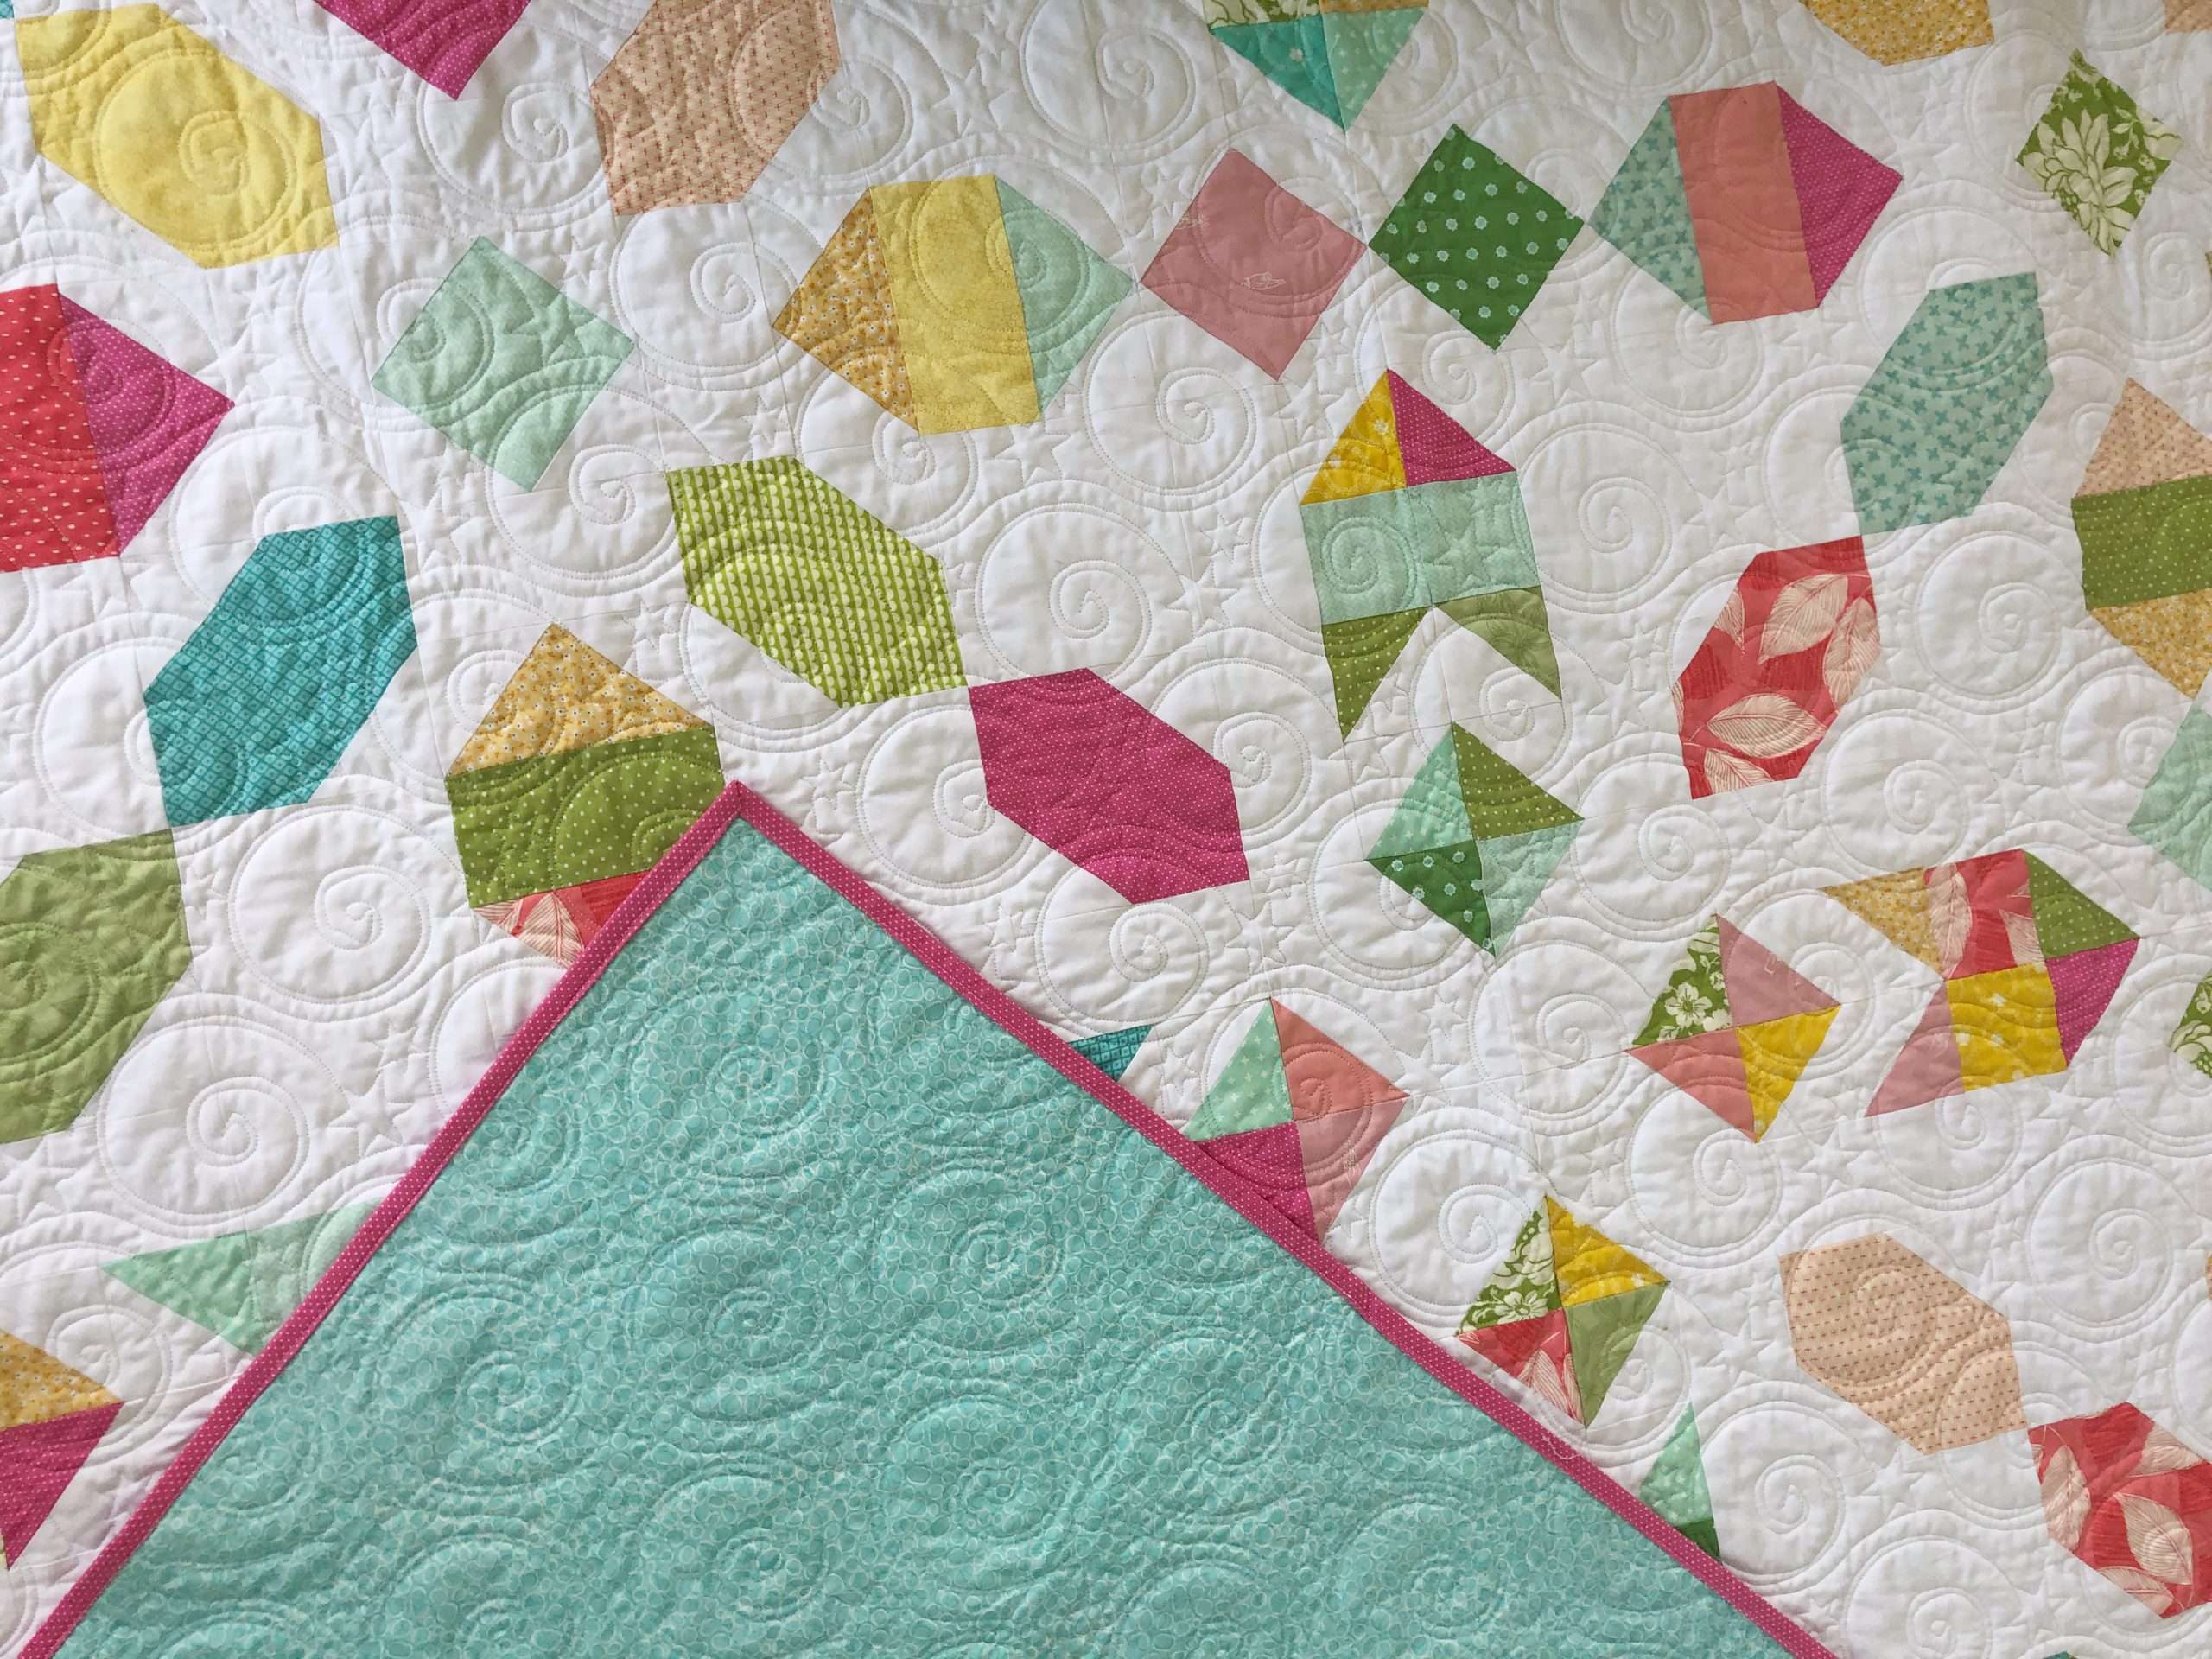 Scrappy Quilt Pattern, ways to use up fabric scraps, reduce waste while quilting